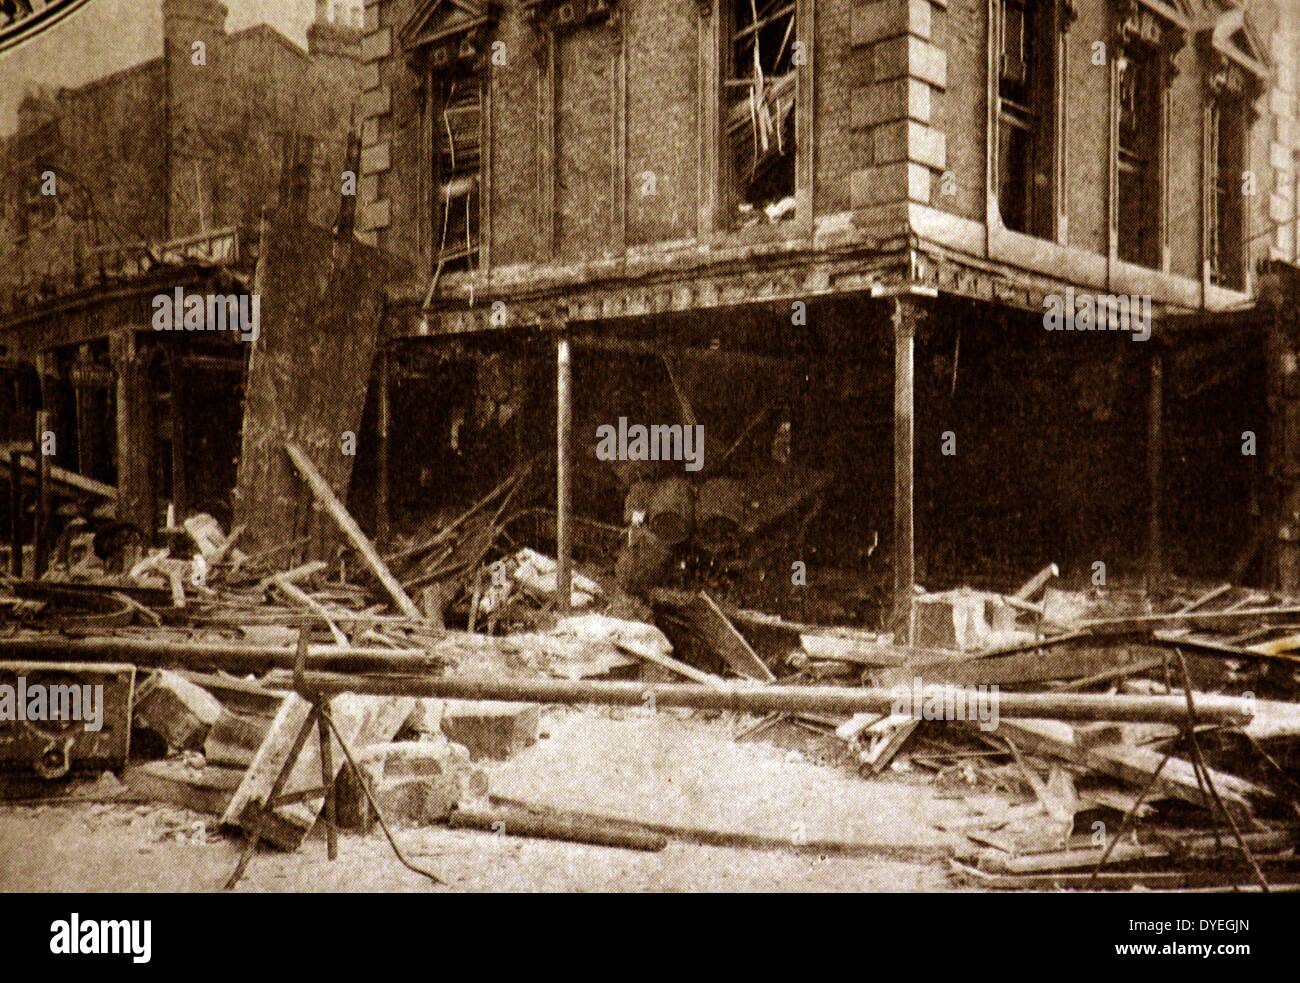 World War 1 - Ruin in a North London thoroughfare. The Eaglet public-house, at the corner of Hornsey Road and Seven Sisters Road, in North London shattered in an aeroplane raid on the night of September 29th, 1917. Stock Photo